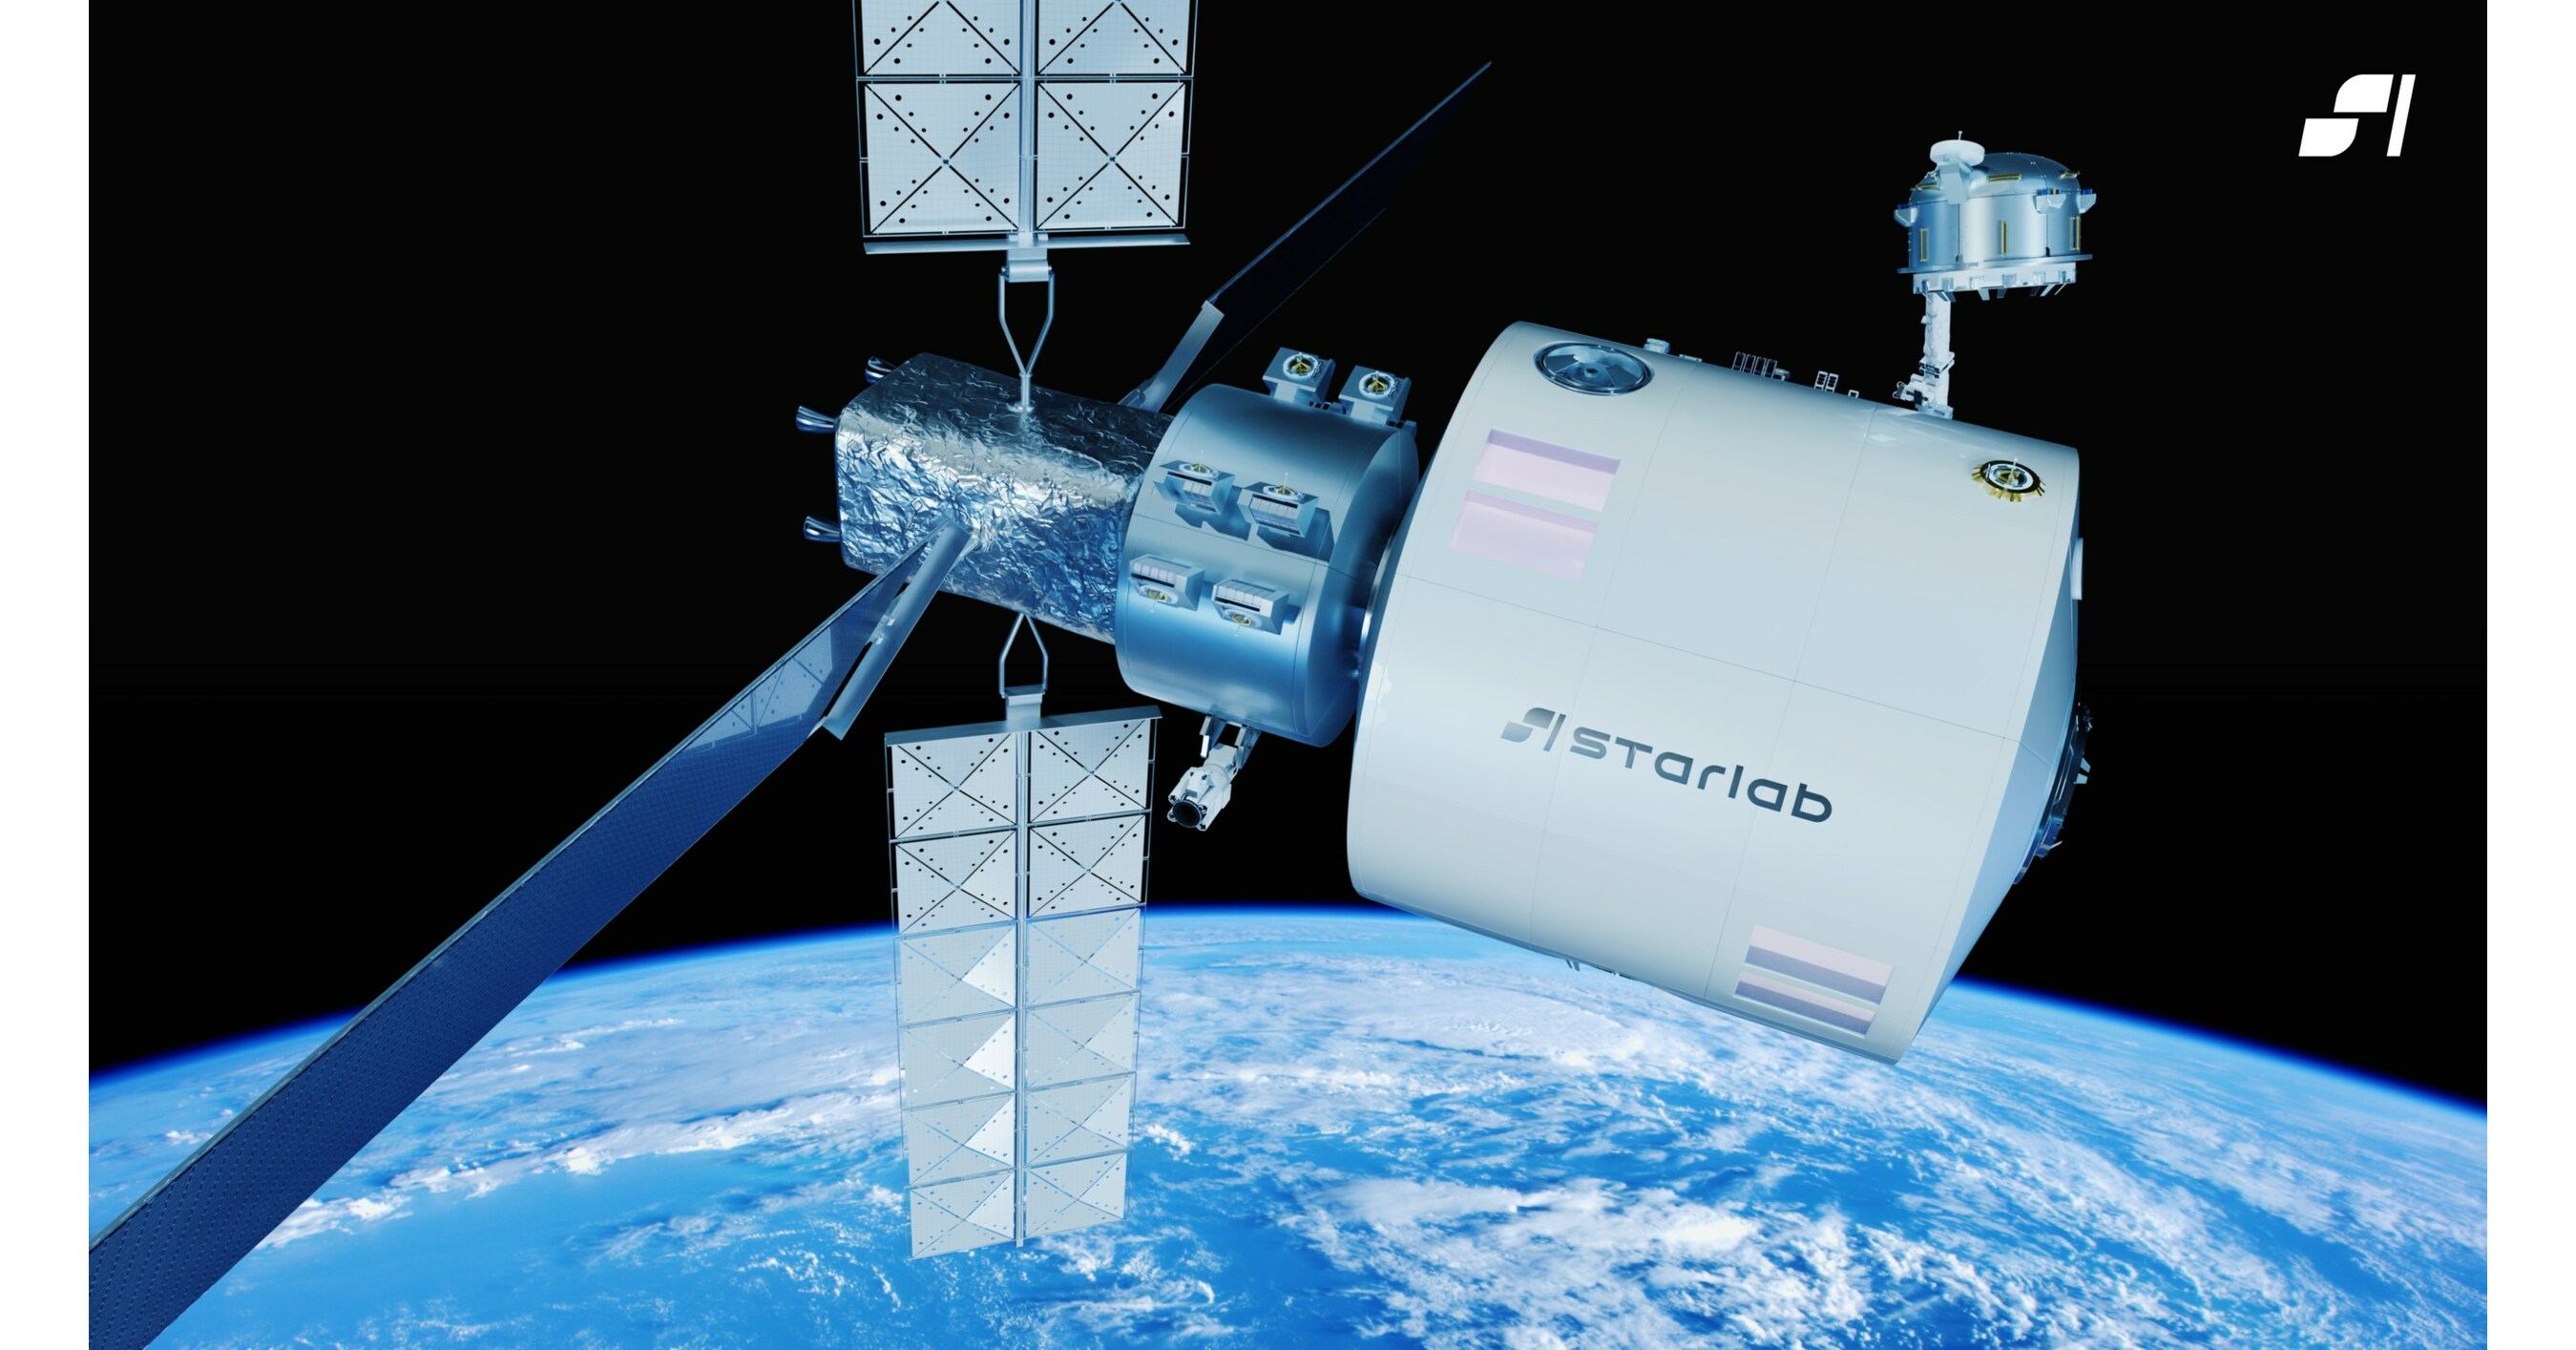 [Airbus] Starlab Voyager_Space_and_Airbus_Joint_Venture_Starlab